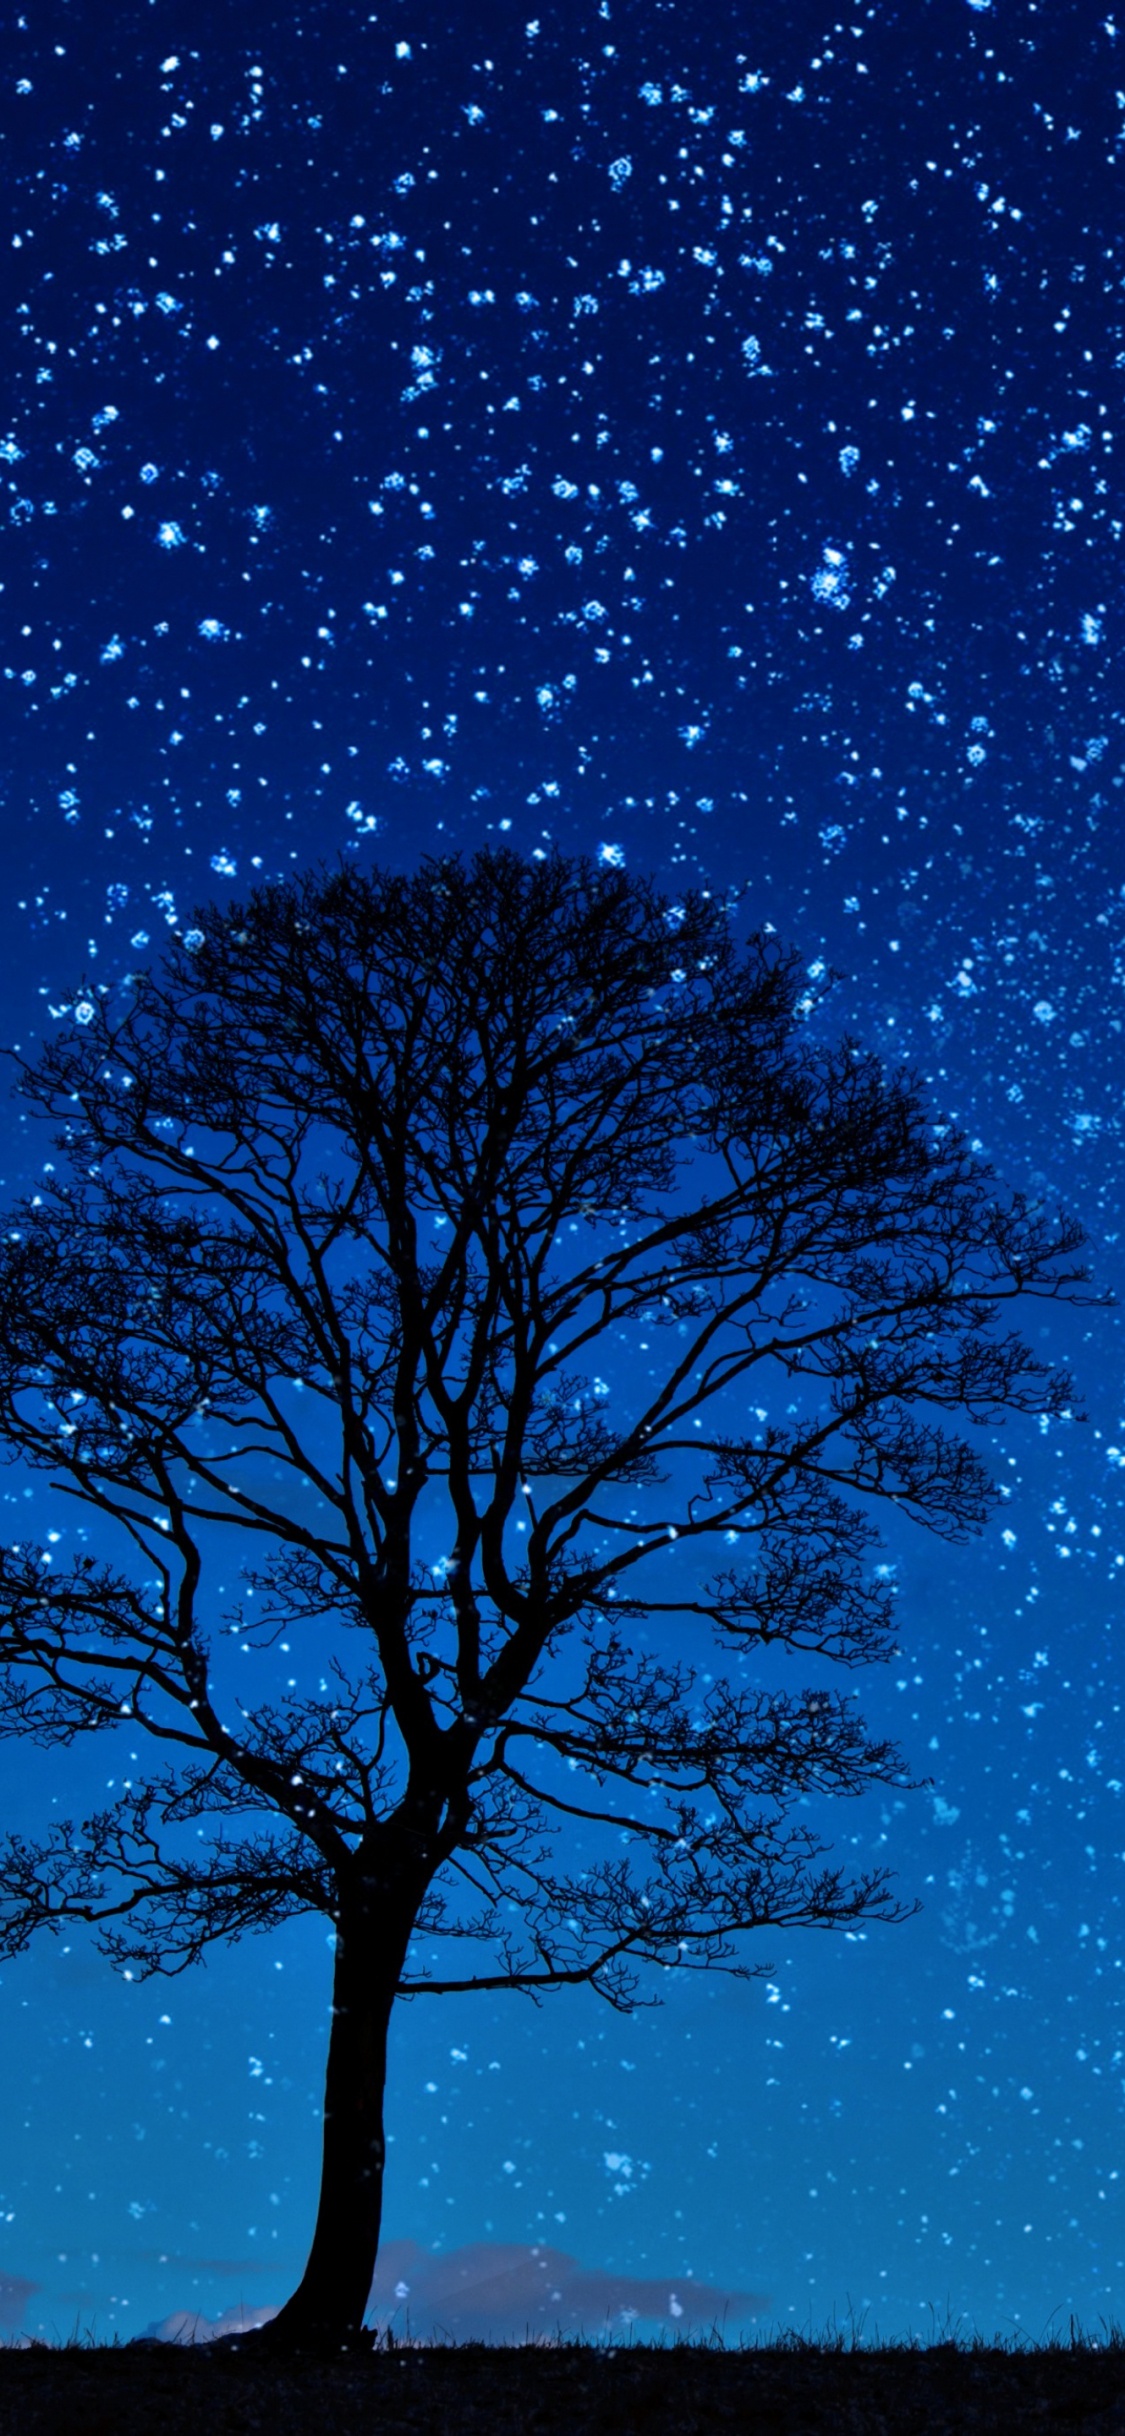 Silhouette of Man Standing Near Bare Tree Under Blue Sky During Night Time. Wallpaper in 1125x2436 Resolution